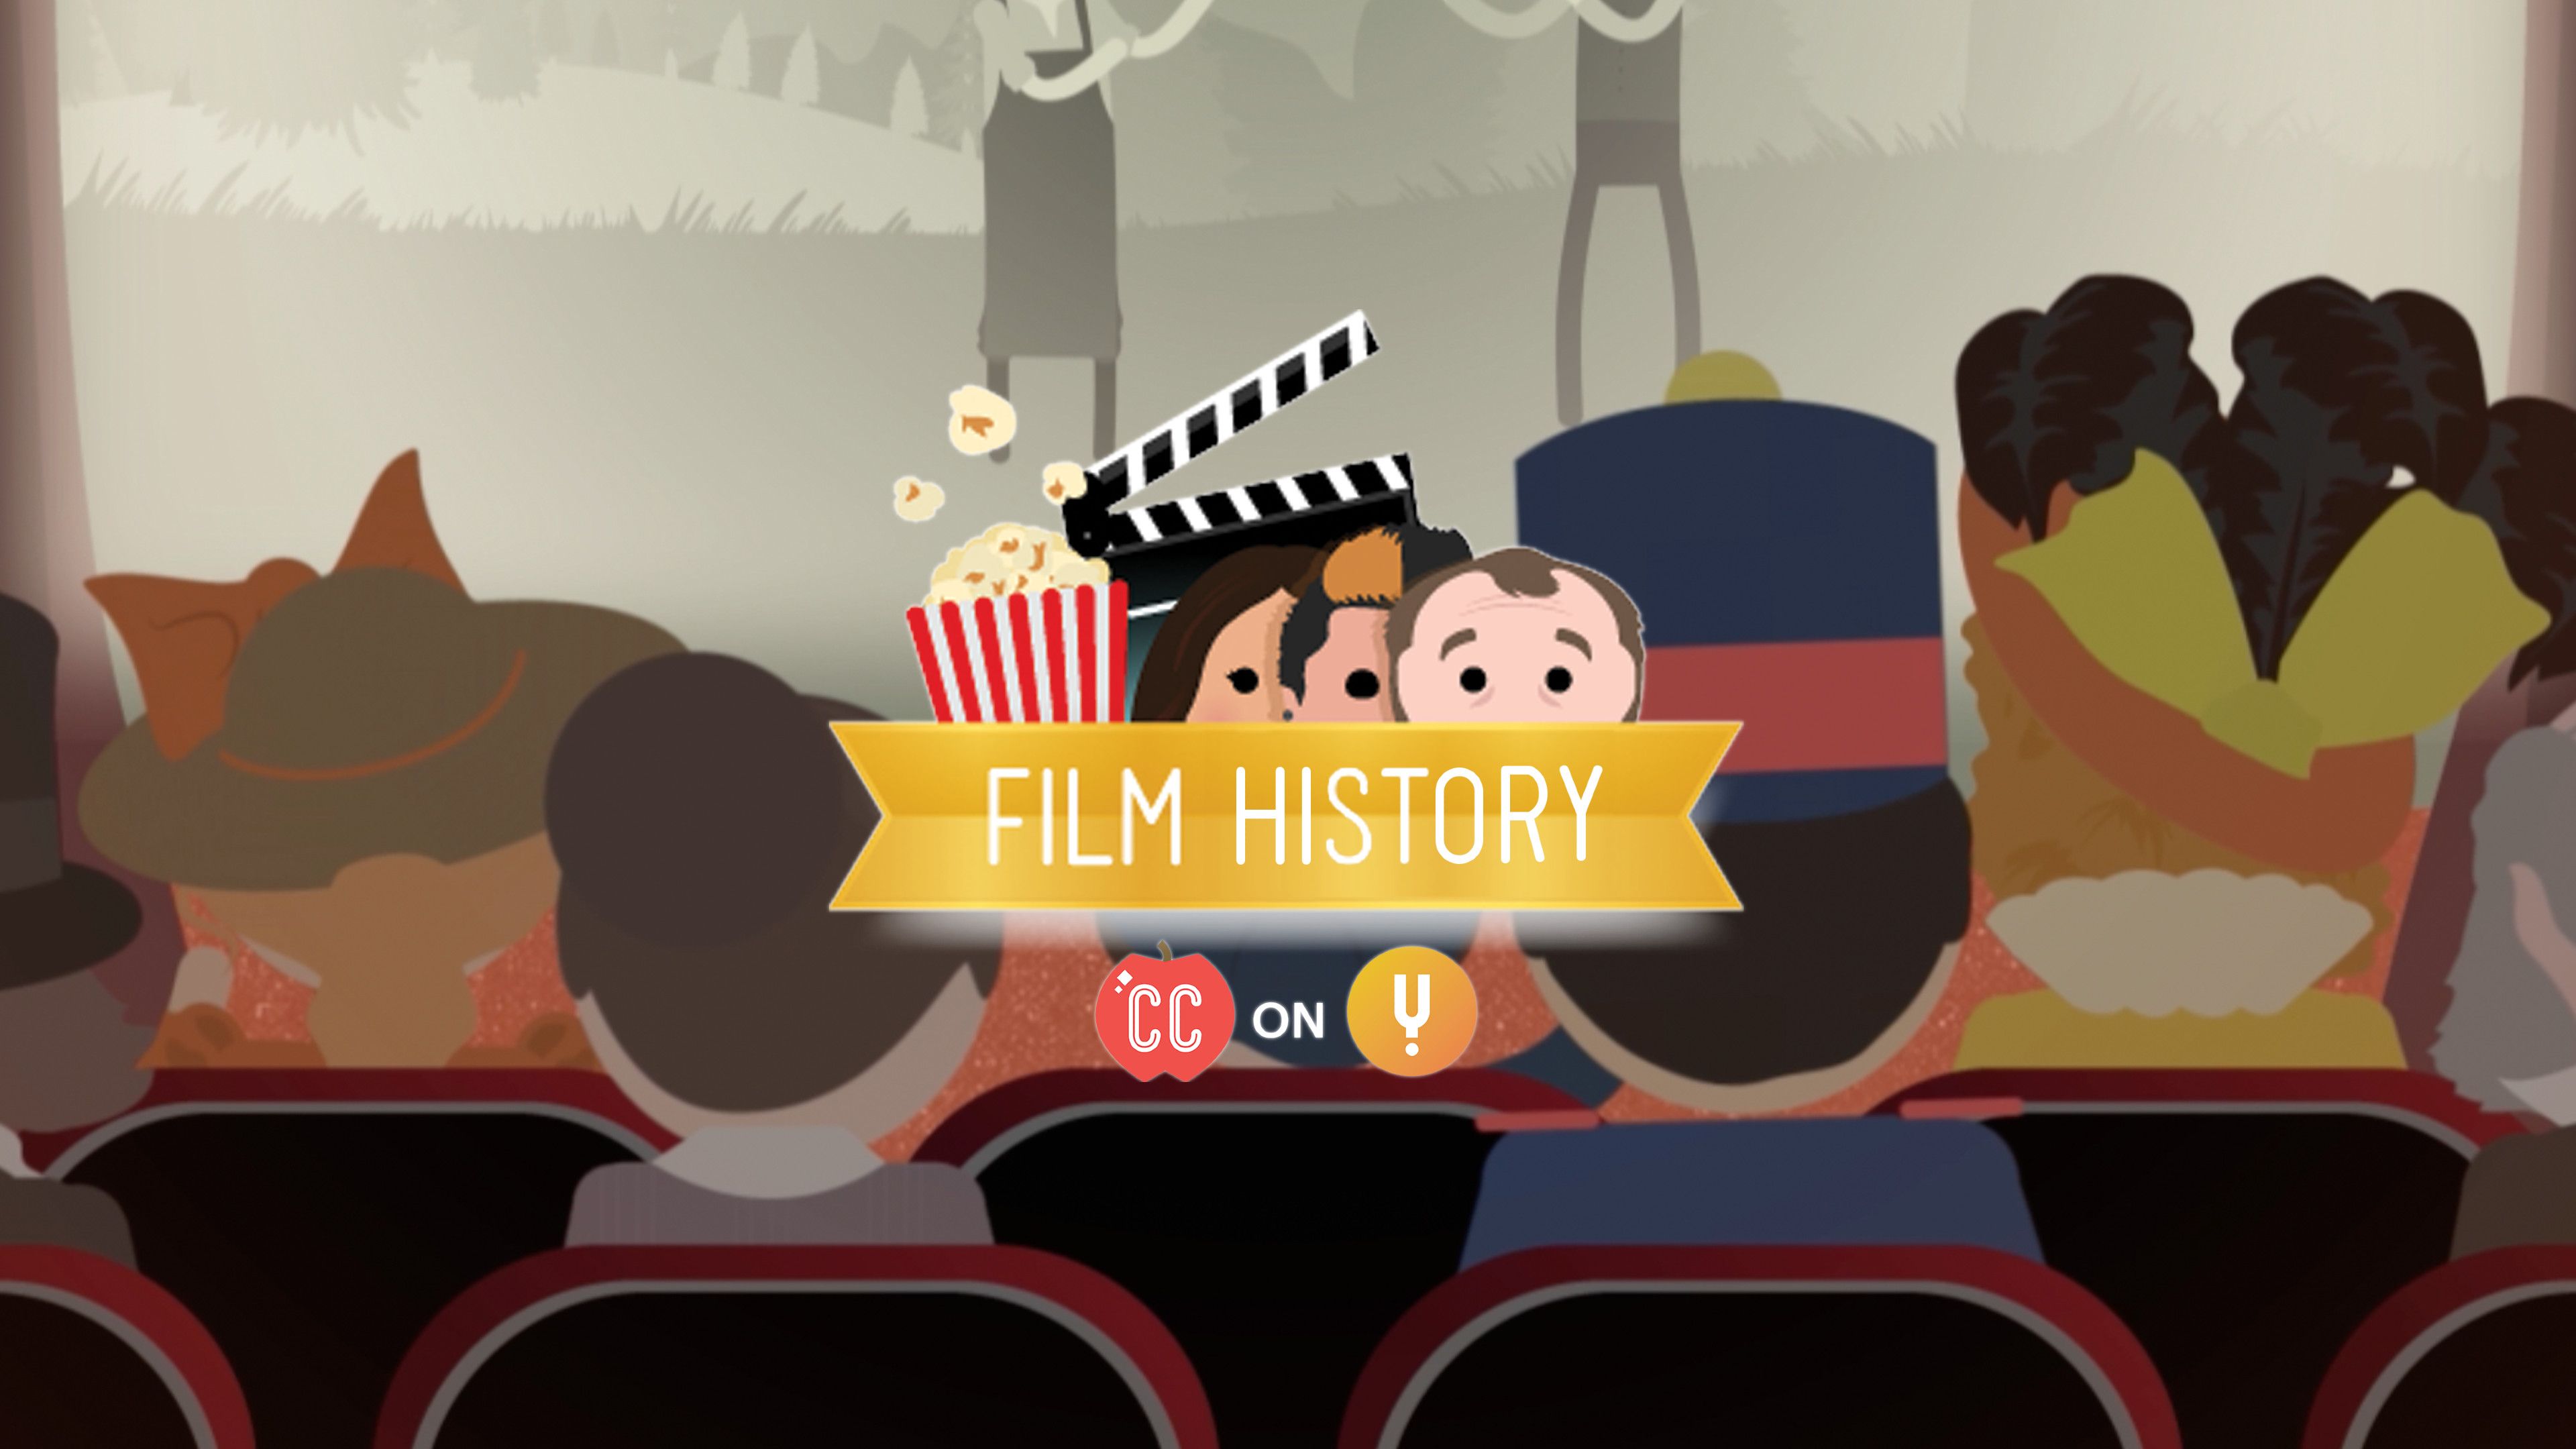 The Lumiere Brothers: Crash Course Film History #3 